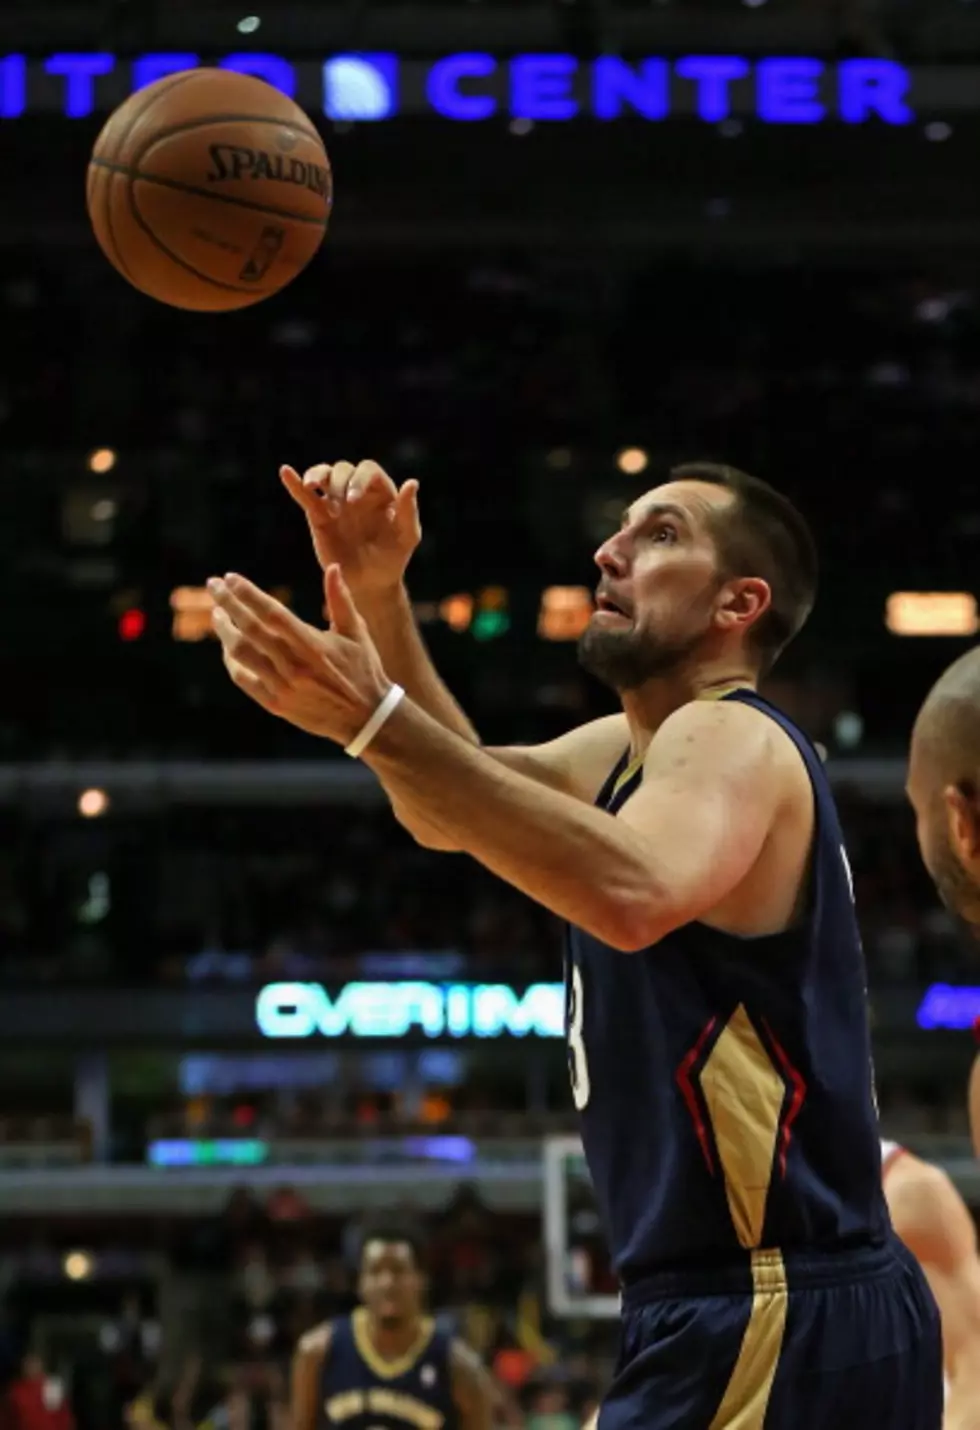 Pelicans Beat Celtics, Ryan Anderson Carted Off With Injury